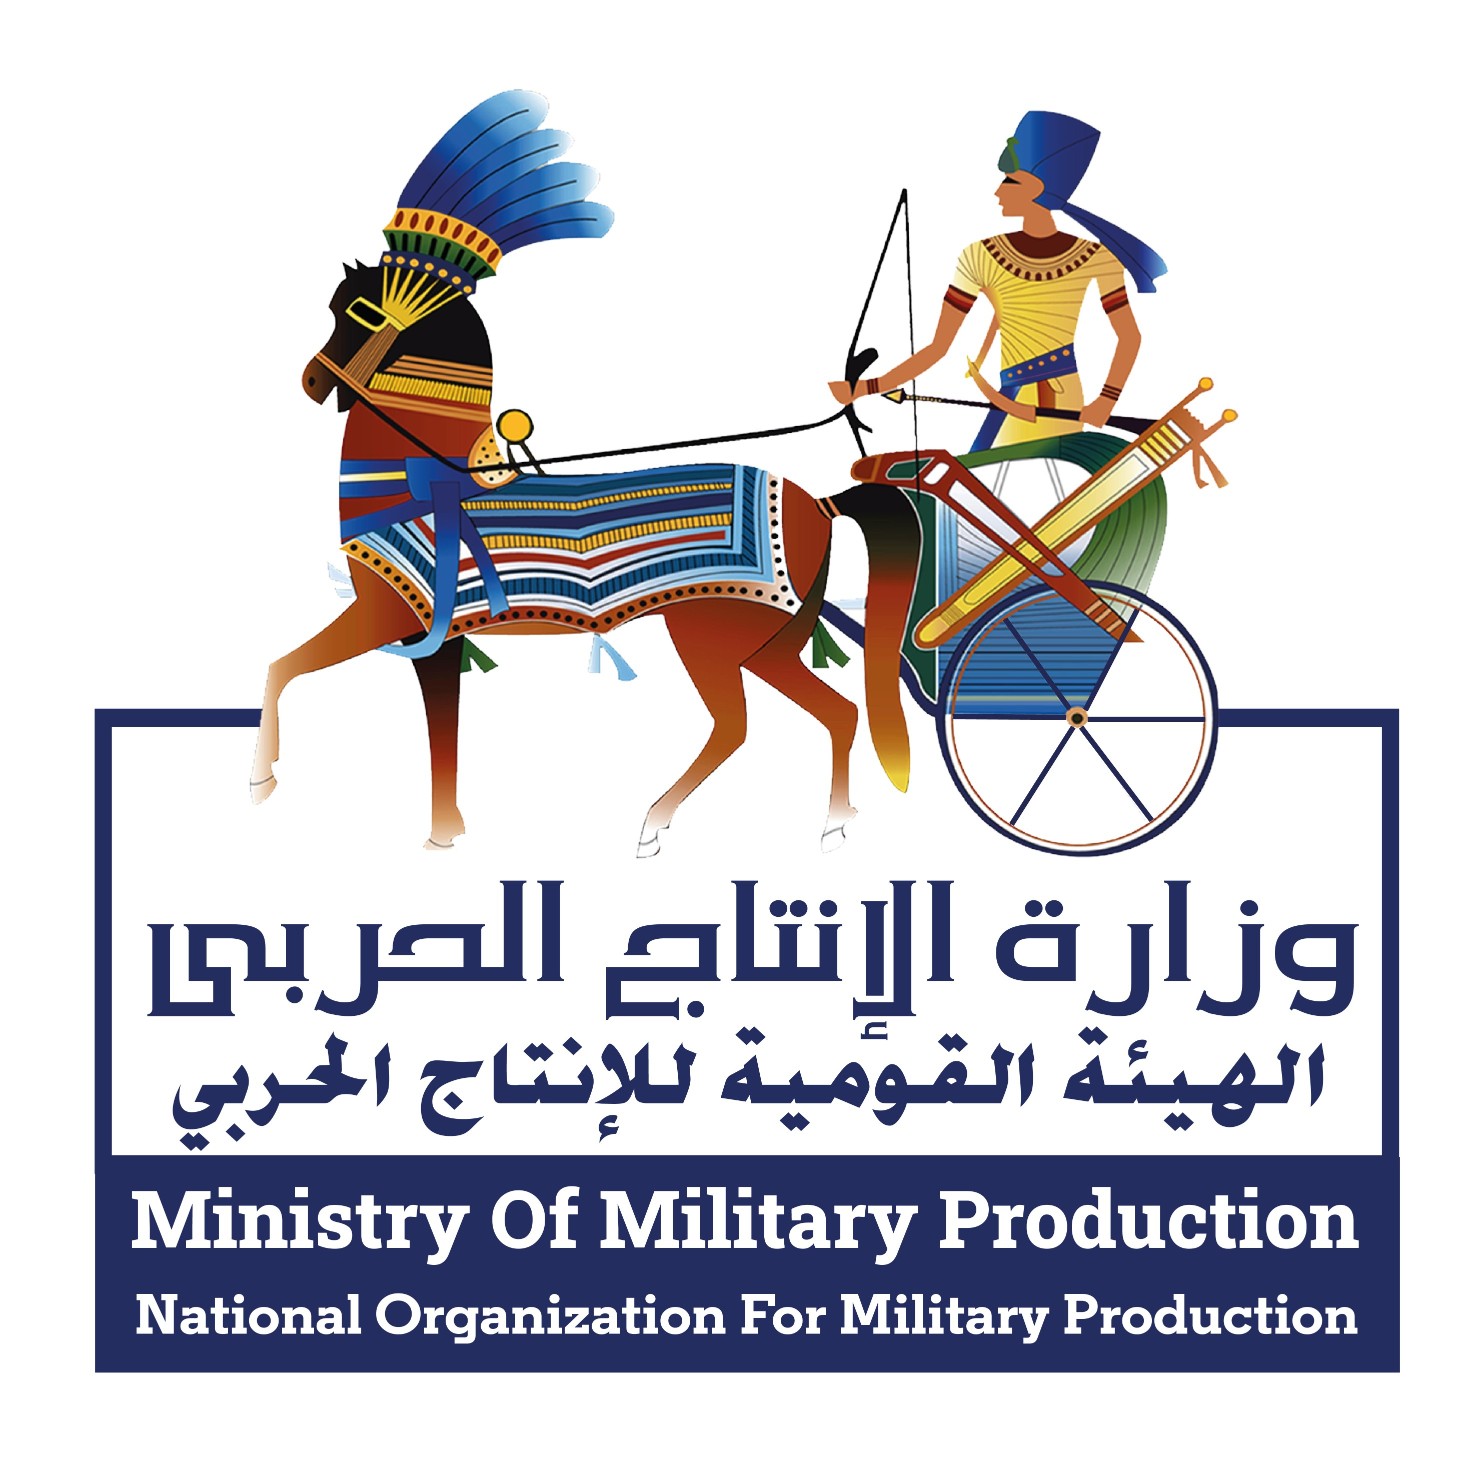 Ministry of Military Production logo